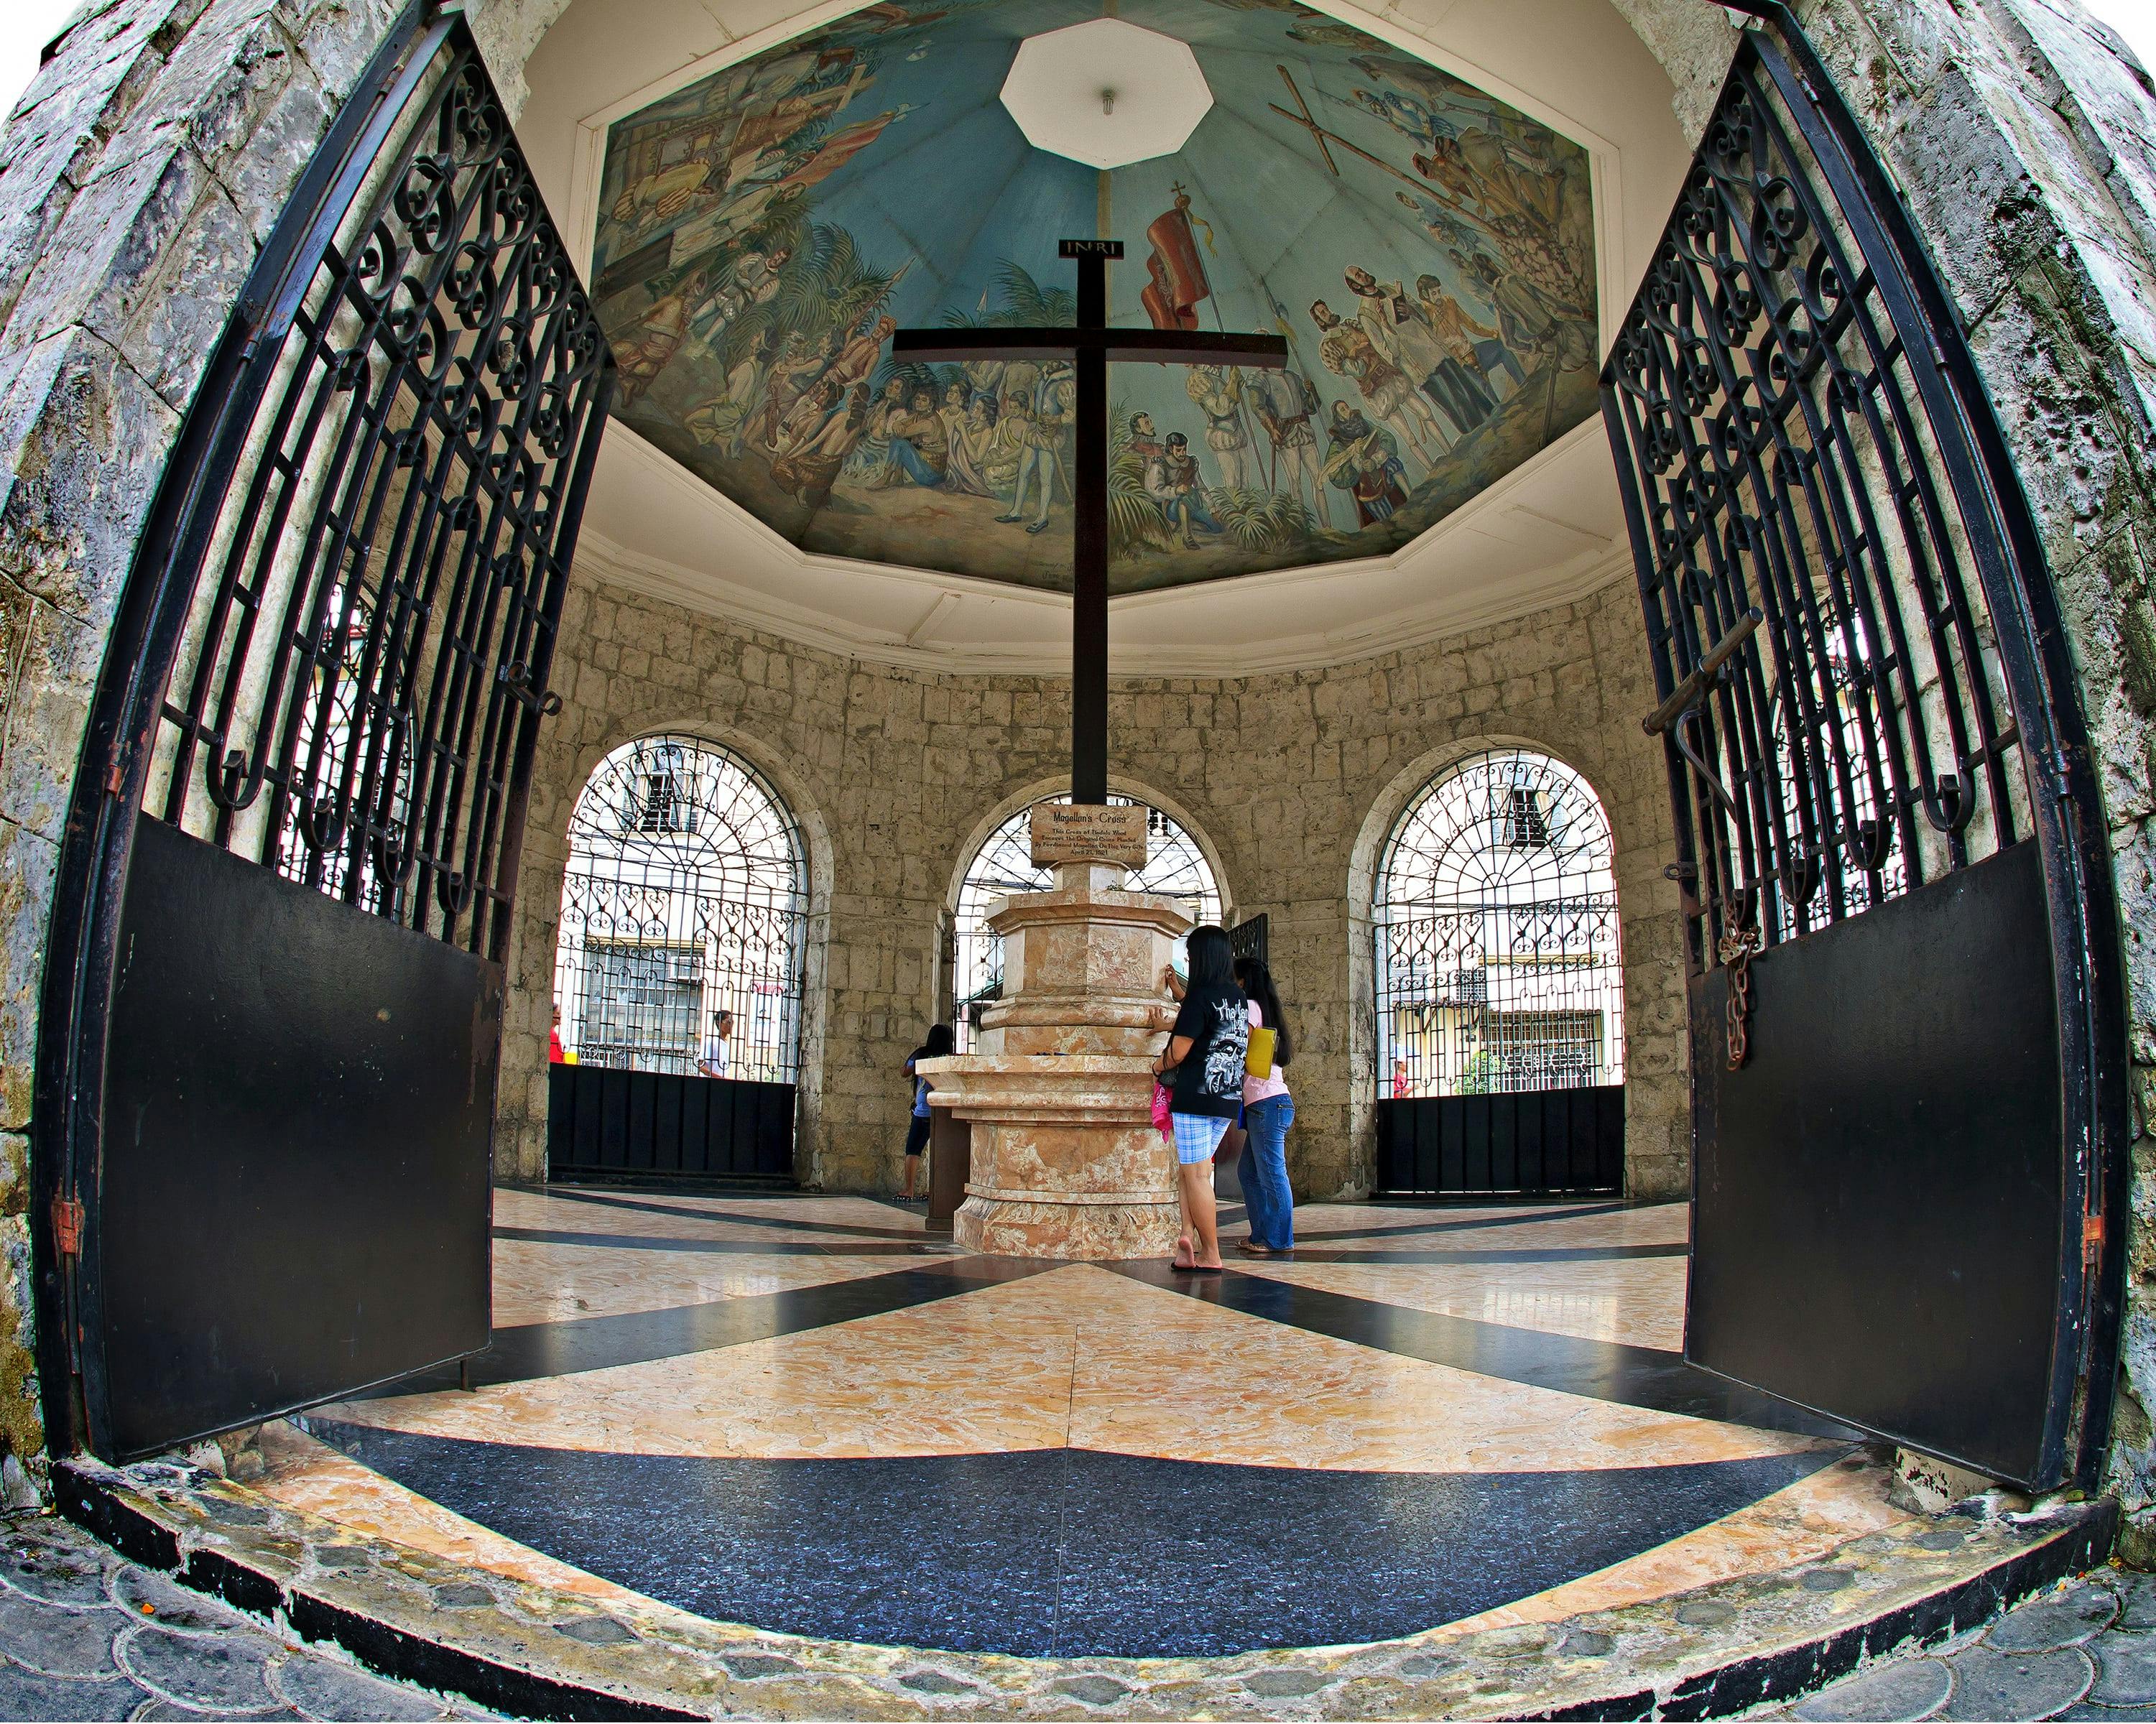 Residents and tourists alike visit the Magellan's Cross to say their prayers